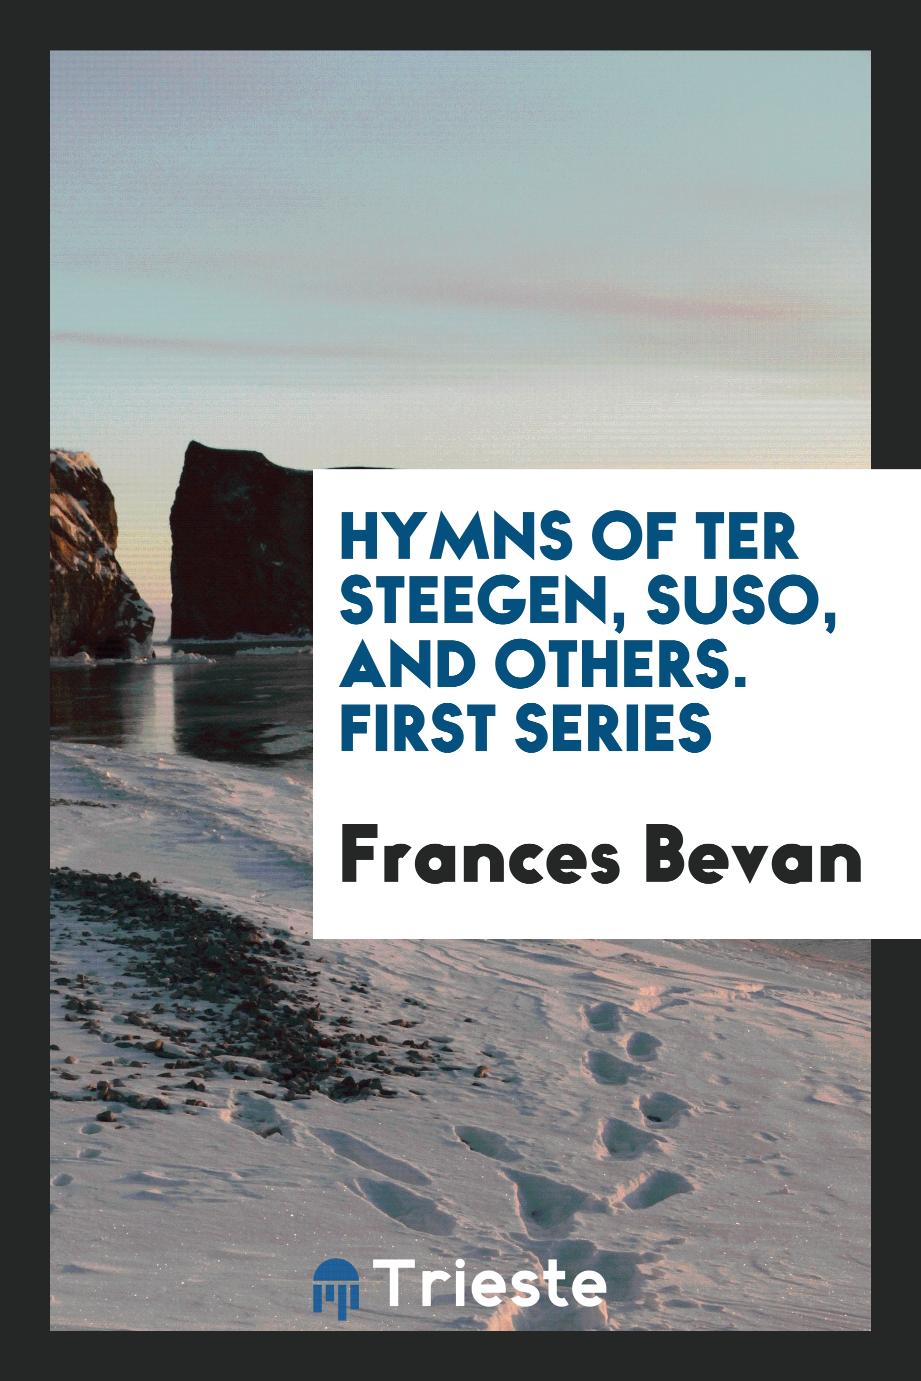 Hymns of Ter Steegen, Suso, and Others. First Series